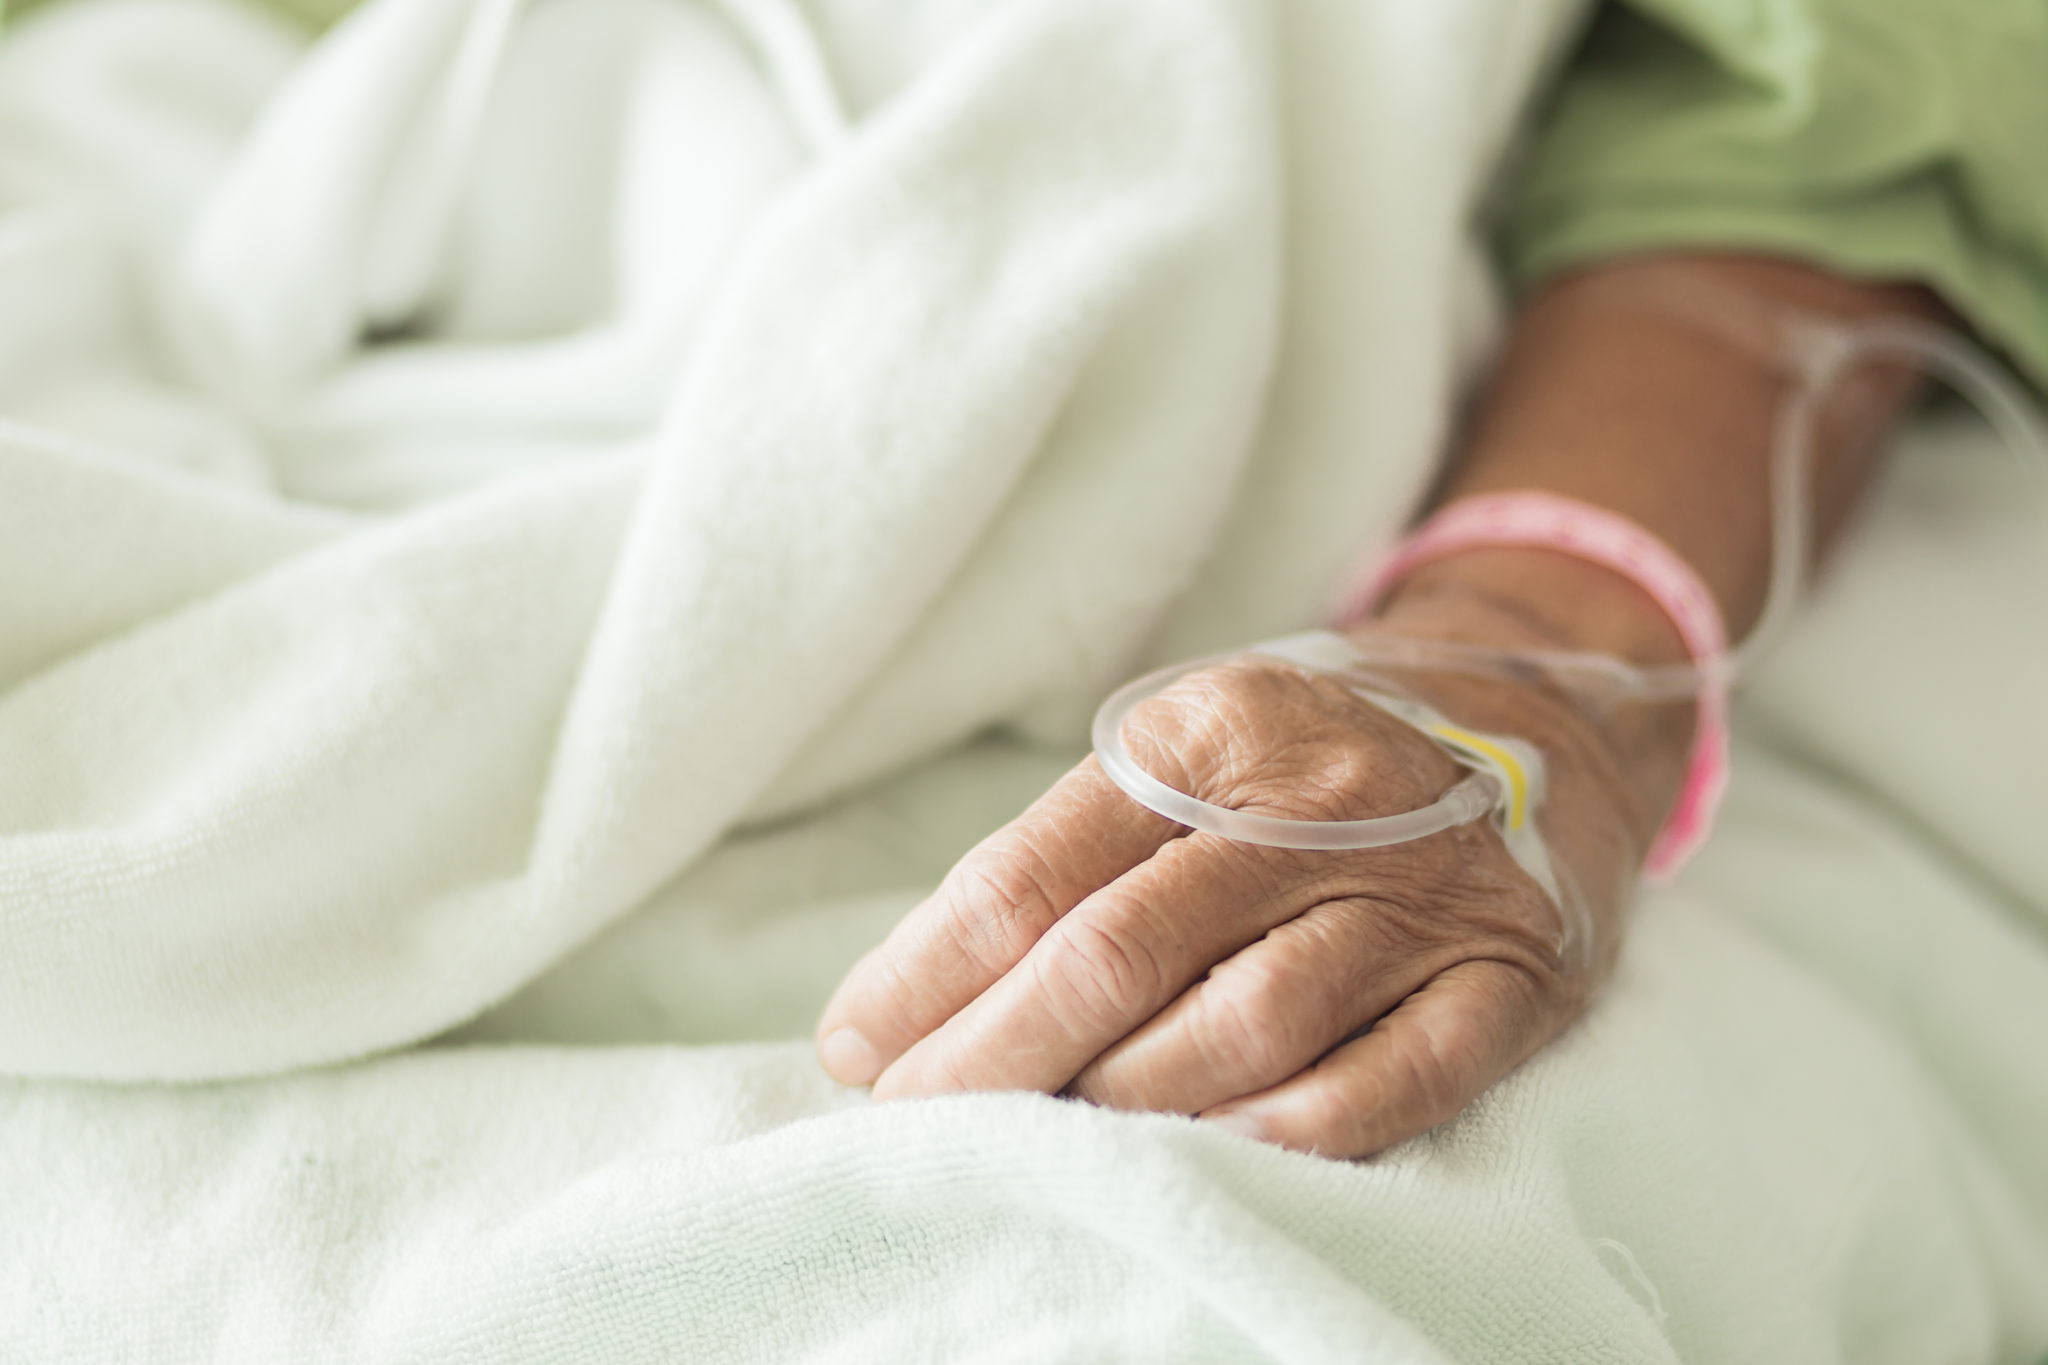 Hand of old woman lying on the bed with IV line 2048 x 1365